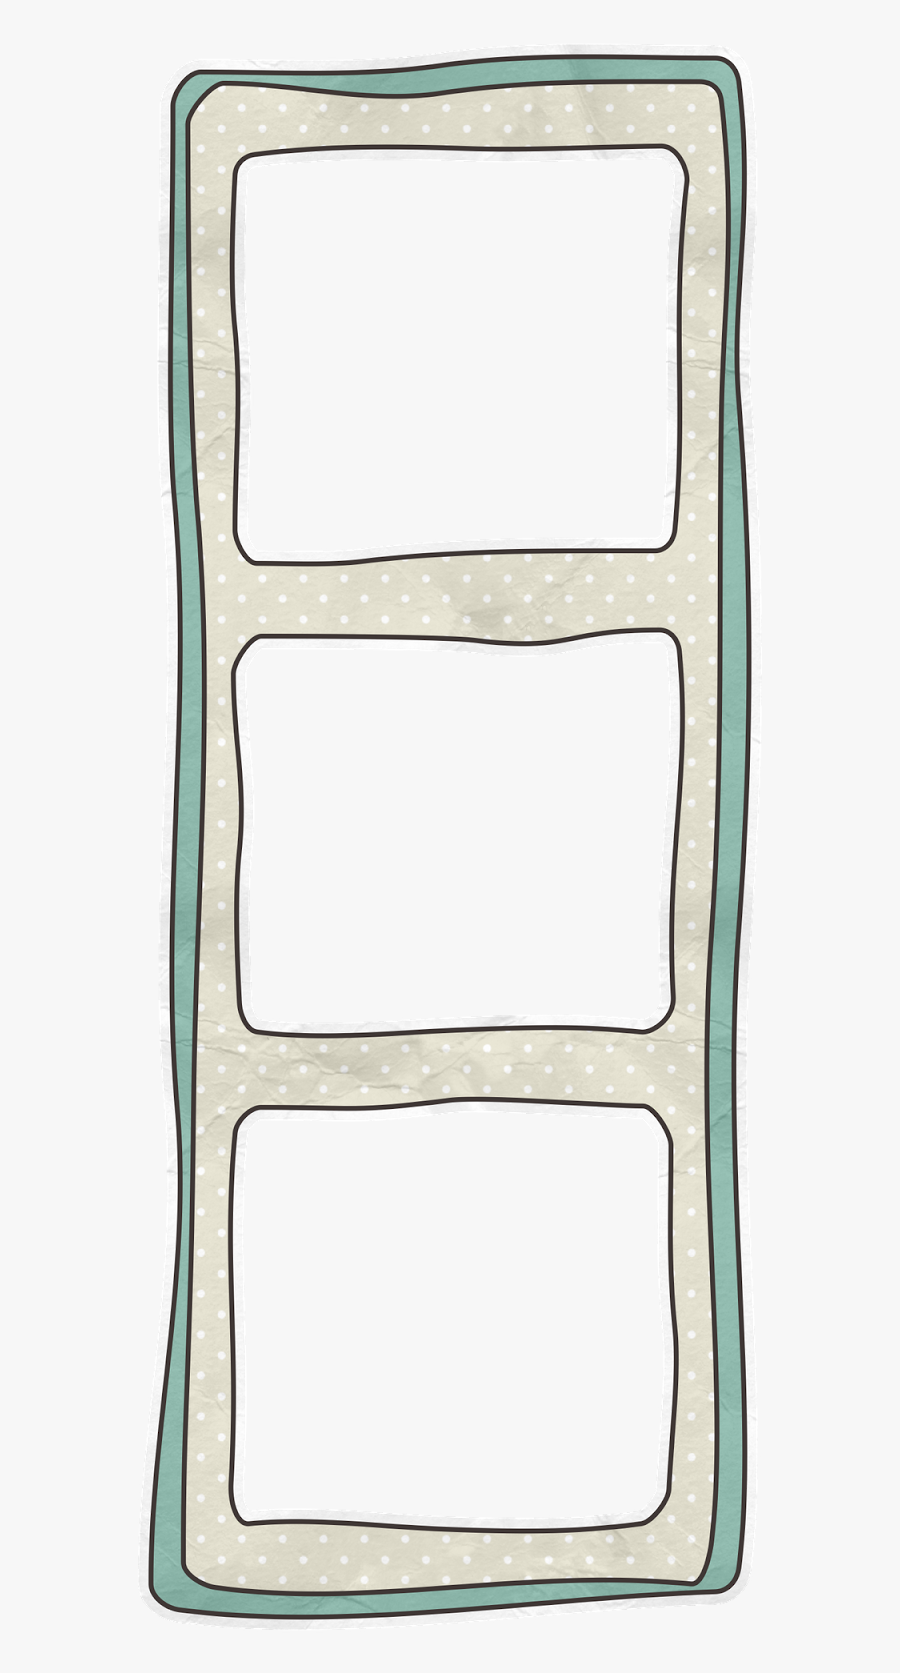 Borders Of The Picnic Clipart - Chair, Transparent Clipart